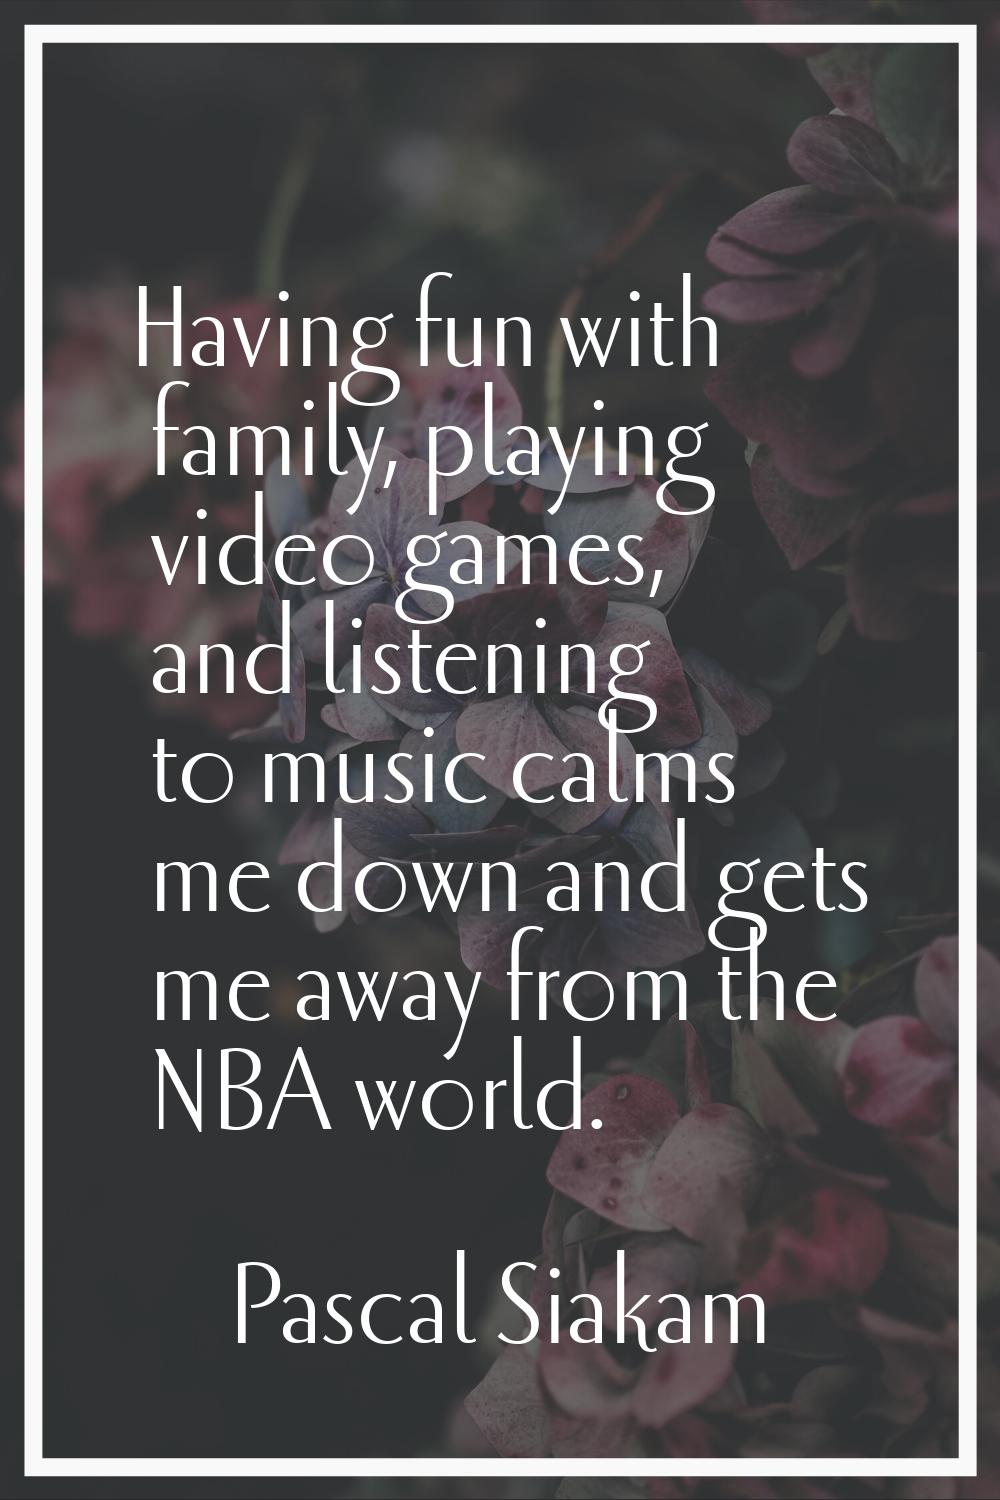 Having fun with family, playing video games, and listening to music calms me down and gets me away 